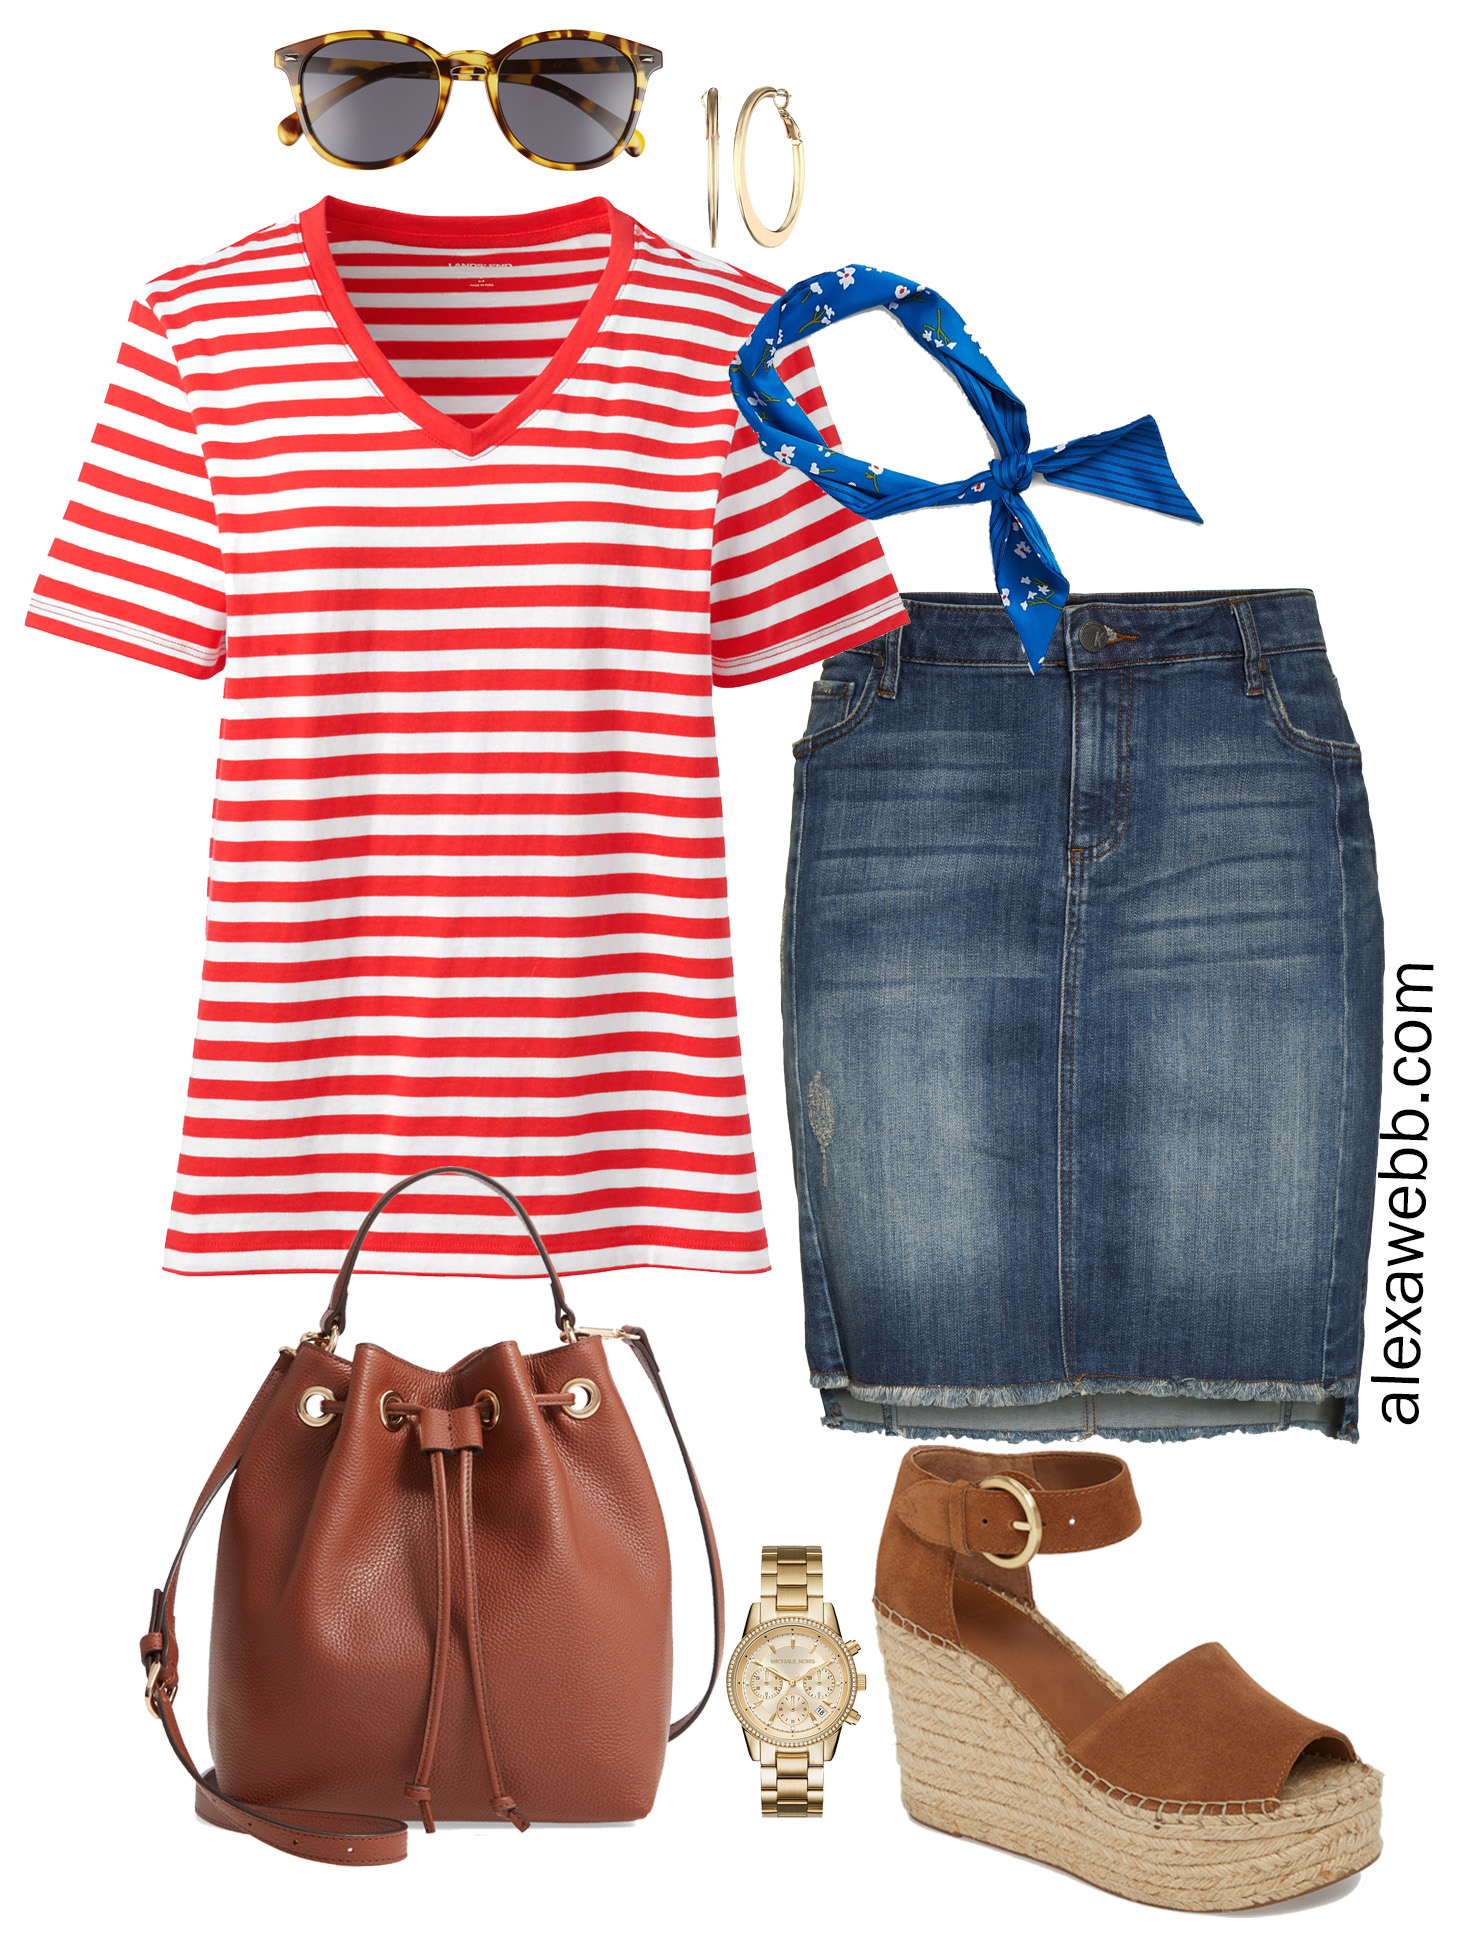 Plus Size Red Striped Tee Outfit - Alexa Webb